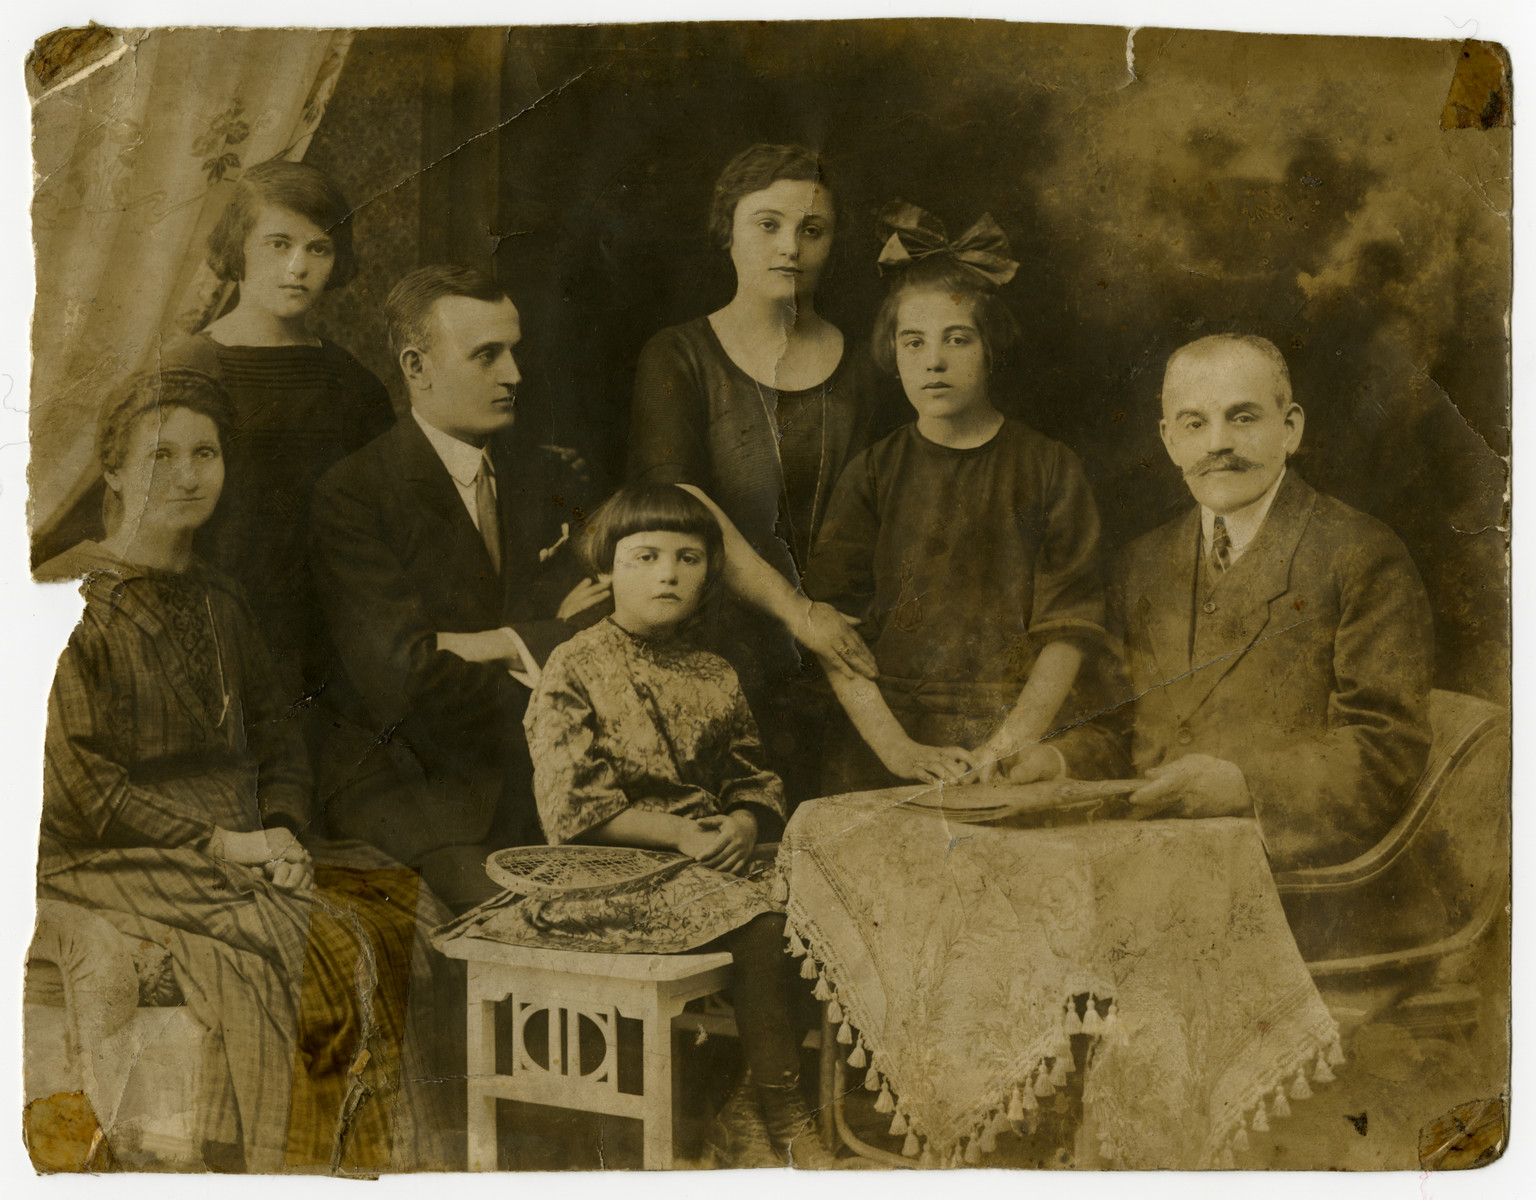 Prewar family portrait Cecilia and Lajos Klein (grandparents of the donor) and their five children.

From the left to right are Cecilia nee Fogel Klein, Ilonka, Sandor, Frederika, Mariska, Rozsa and Lajos Klein.